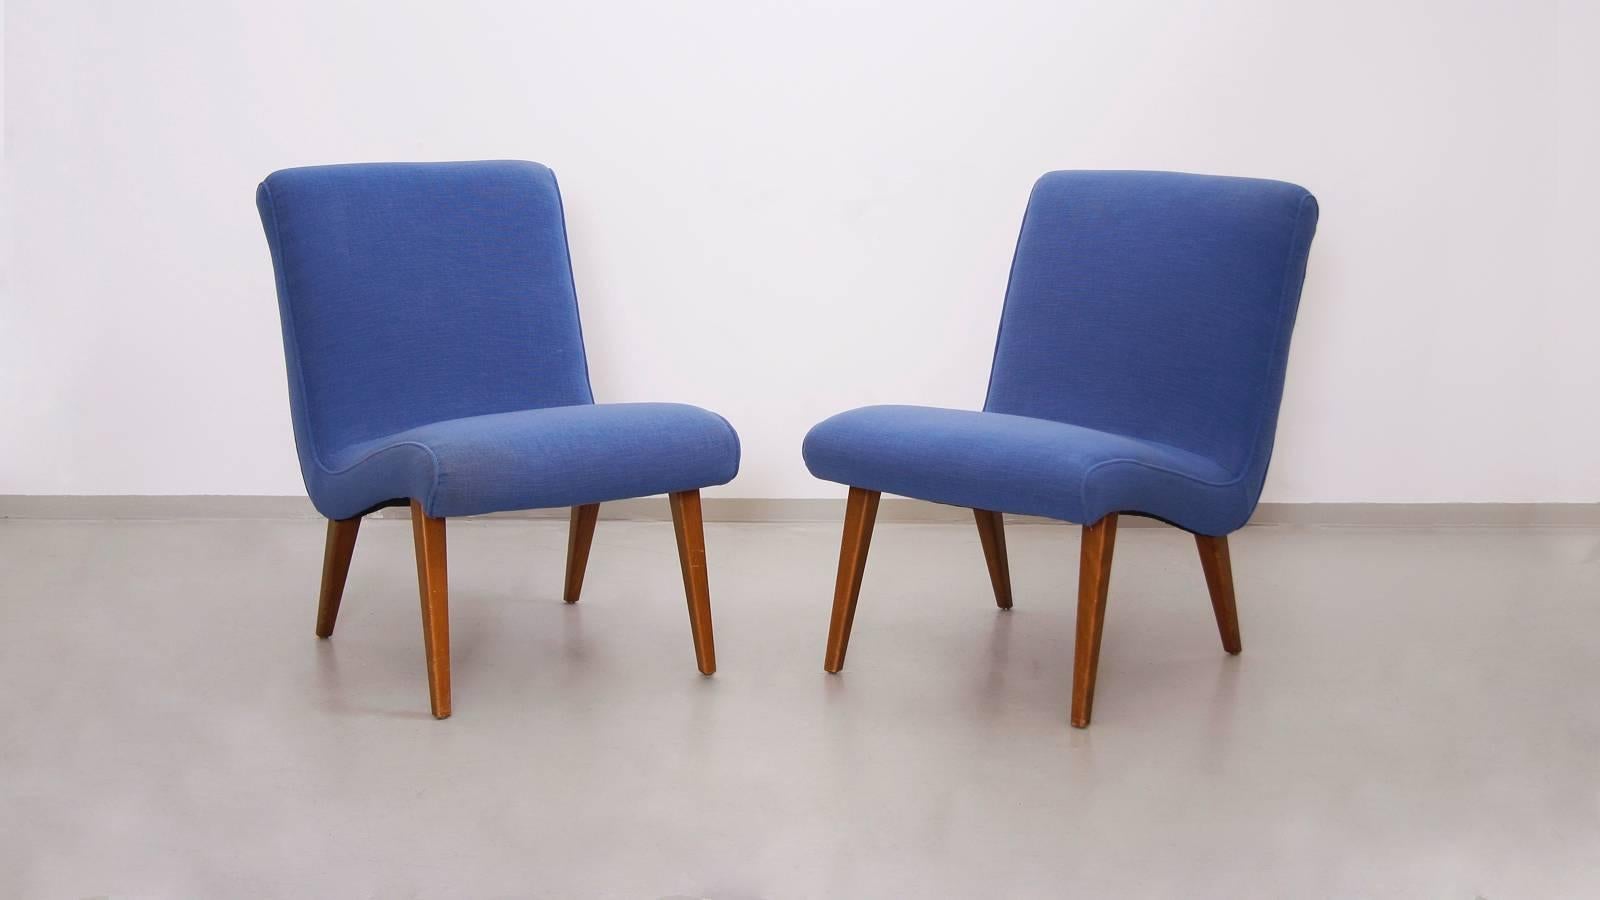 Nice pair of upholstered Risom lounge chairs in blue fabric. Very strong upholstery on that older Restauration!